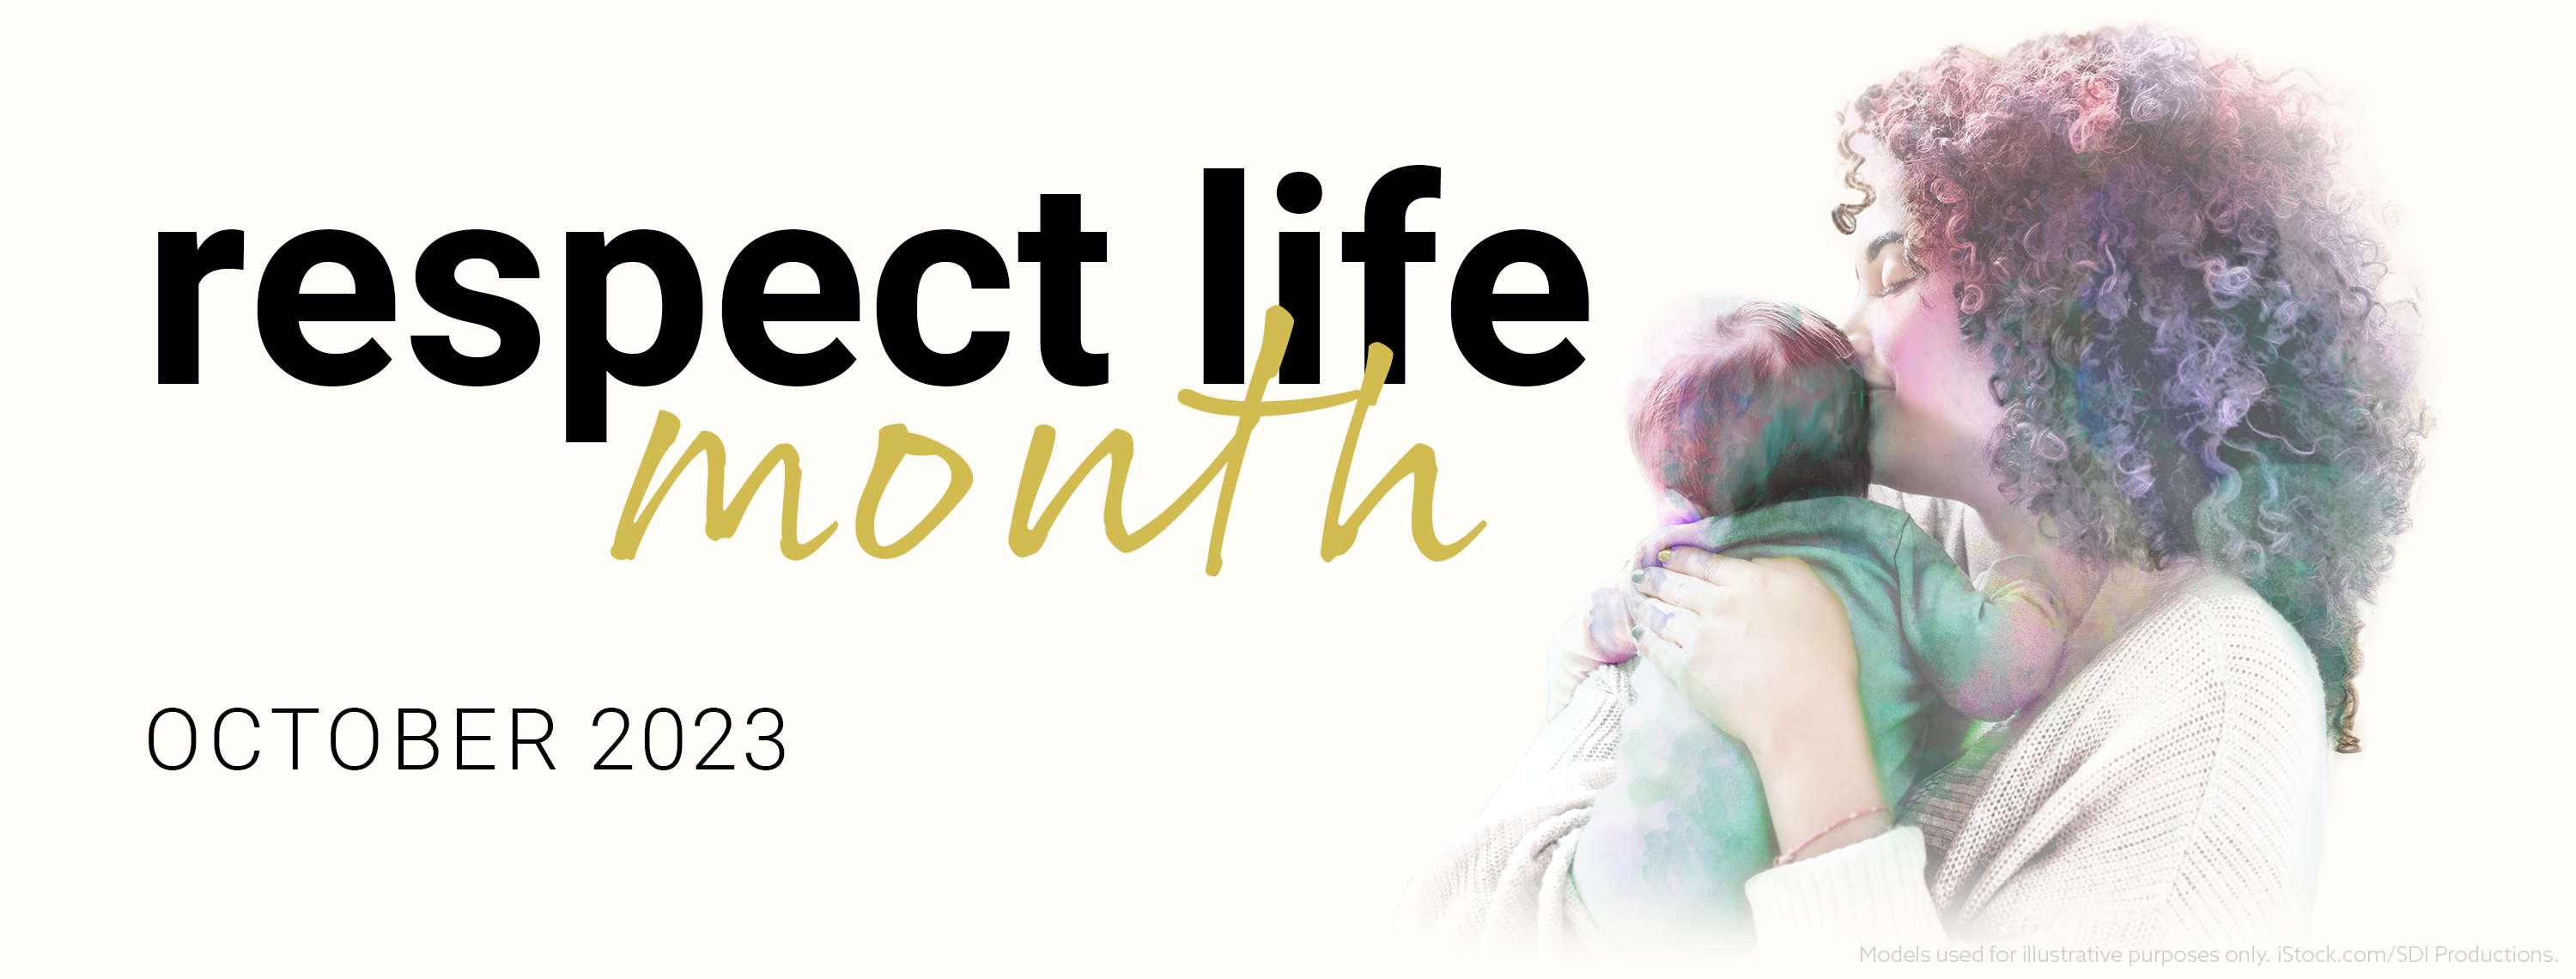 October 2023 Respect Life Month